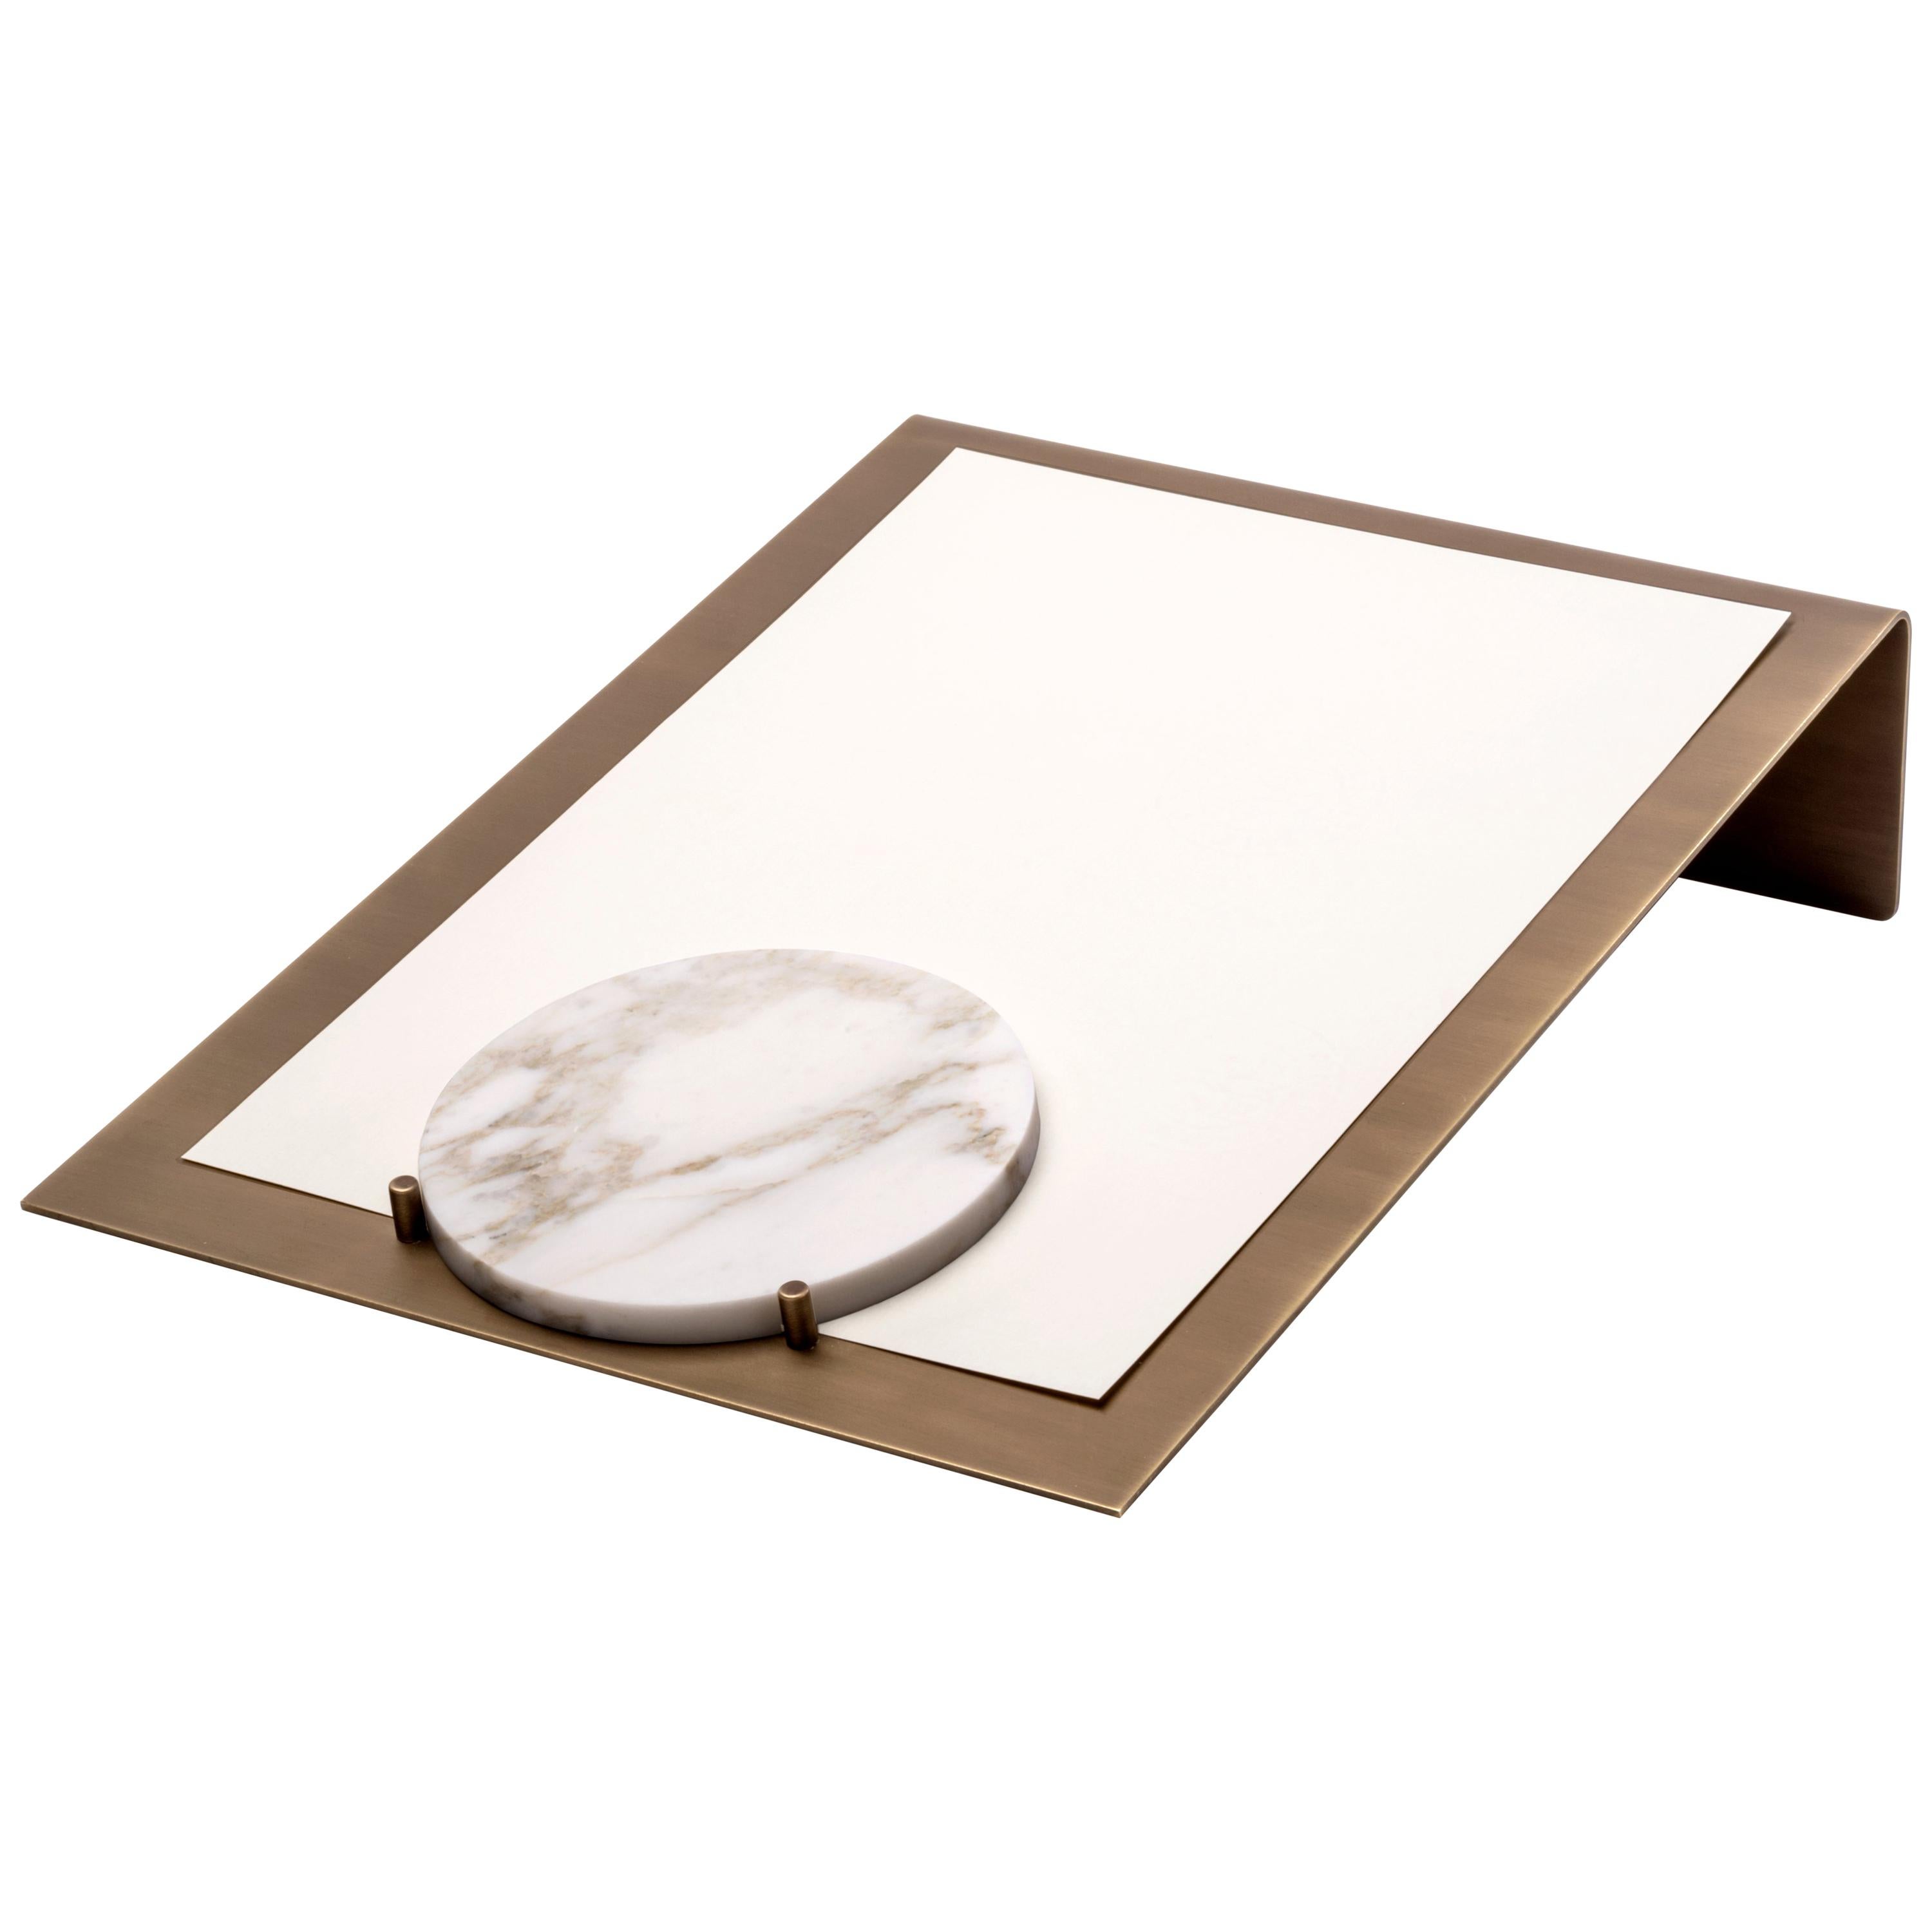 Document holder in burnished brass and Calacatta Vagli marble. Designed by Studiocharlie for Salvatori, the Balancing series of desktop accessories combines brass and natural stone for a fresh take on traditional decorative objects. Perfect as a